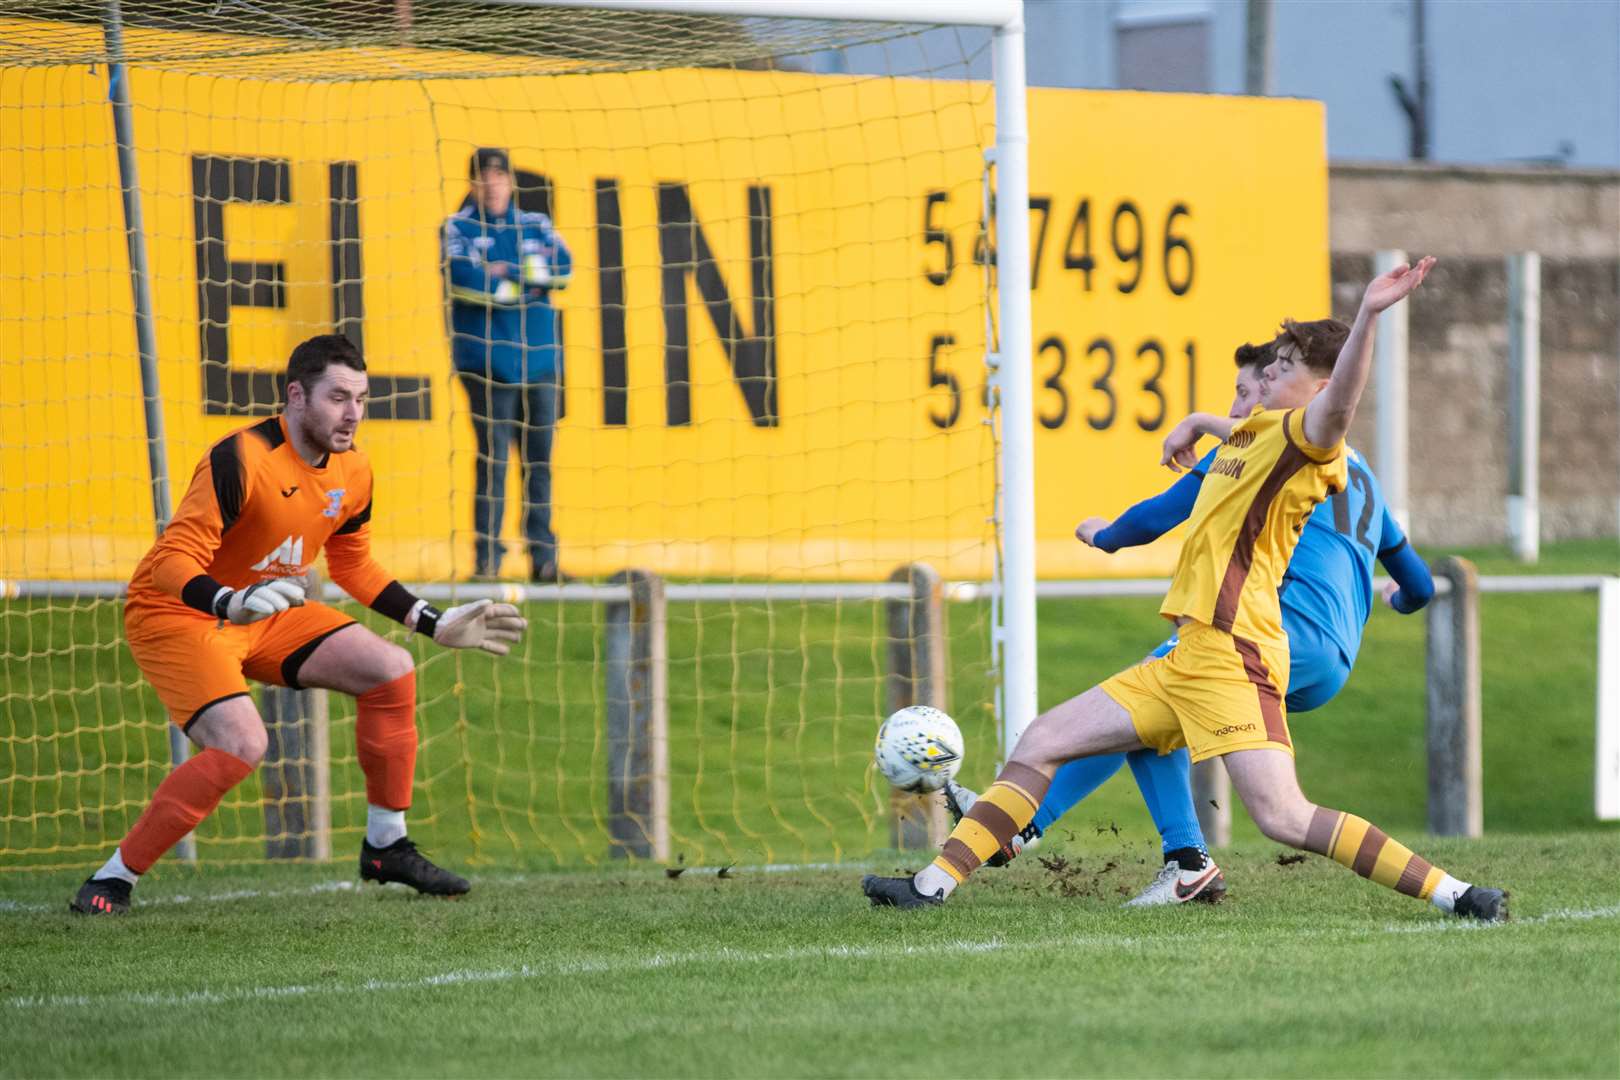 Forres forward Ben Barron opens the scoring for the home side as he beats Strathspey defender David Ross and keeper Michael MacCallum...Forres Mechanics FC (8) vs Strathspey Thistle FC (1) - Highland Football League 22/23 - Mosset Park, Forres 07/01/23...Picture: Daniel Forsyth..